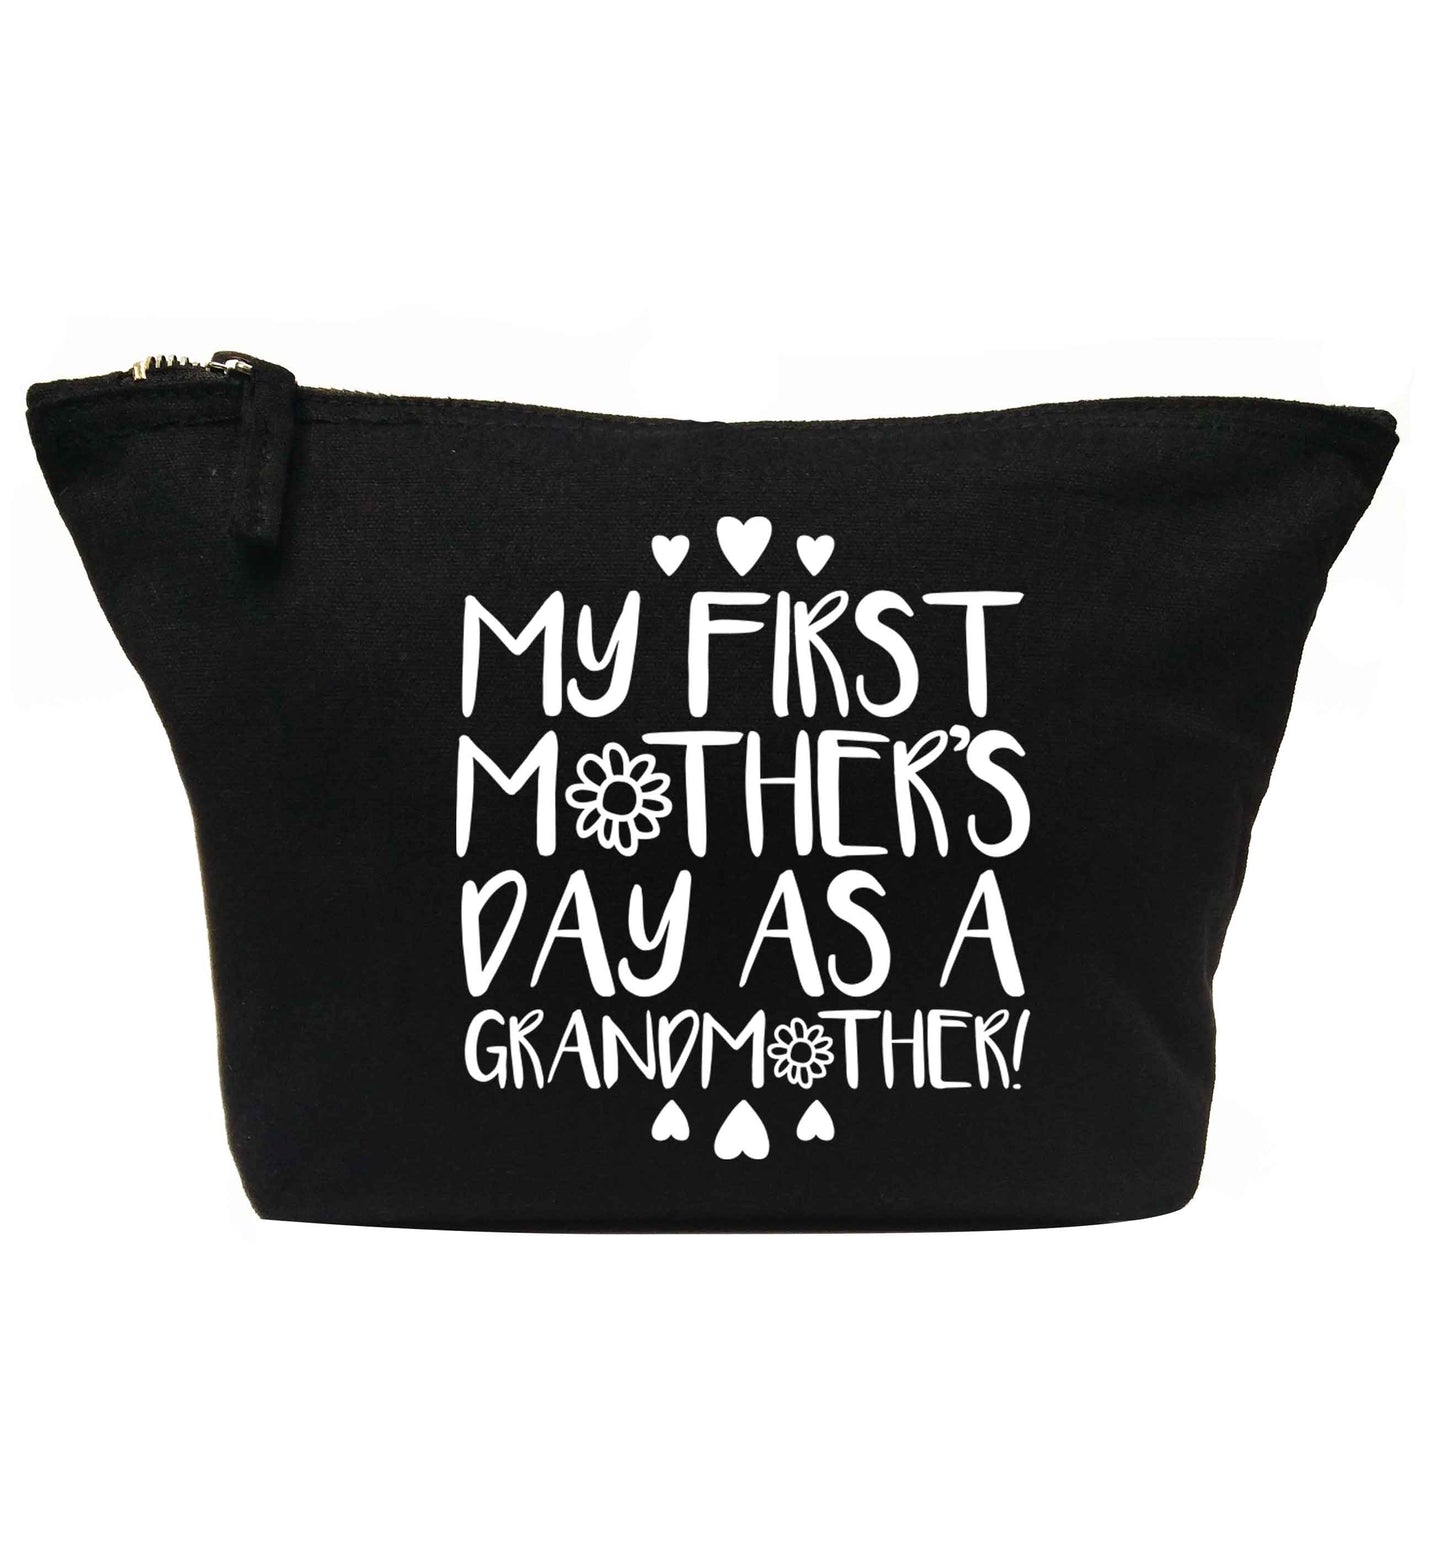 It's my first mother's day as a grandmother | Makeup / wash bag